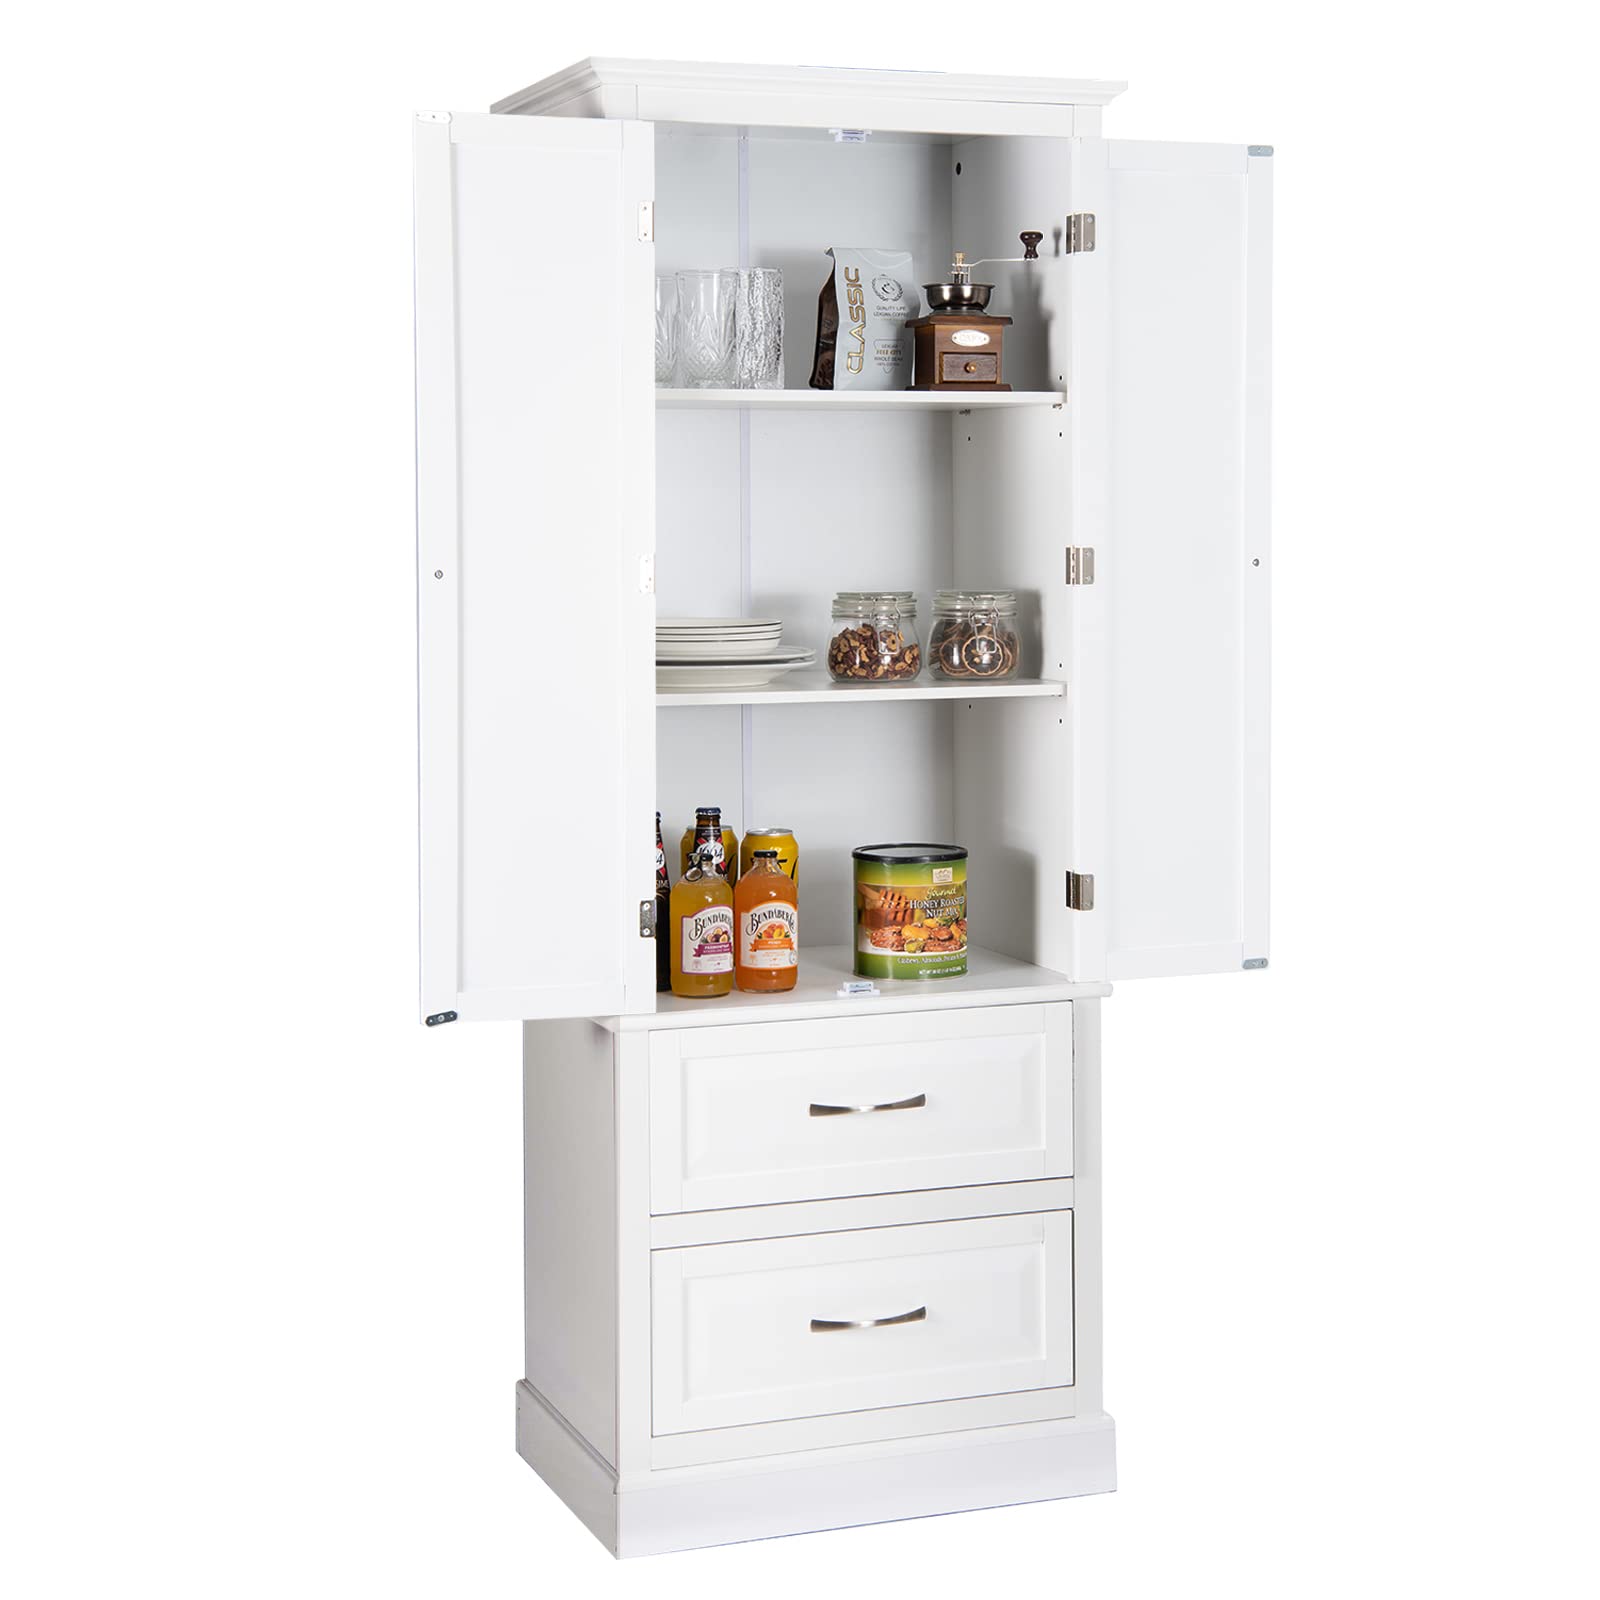 Giantex Kitchen Pantry Cabinet - 62” Floor Storage Cabinet with 2 Large Drawers(White)